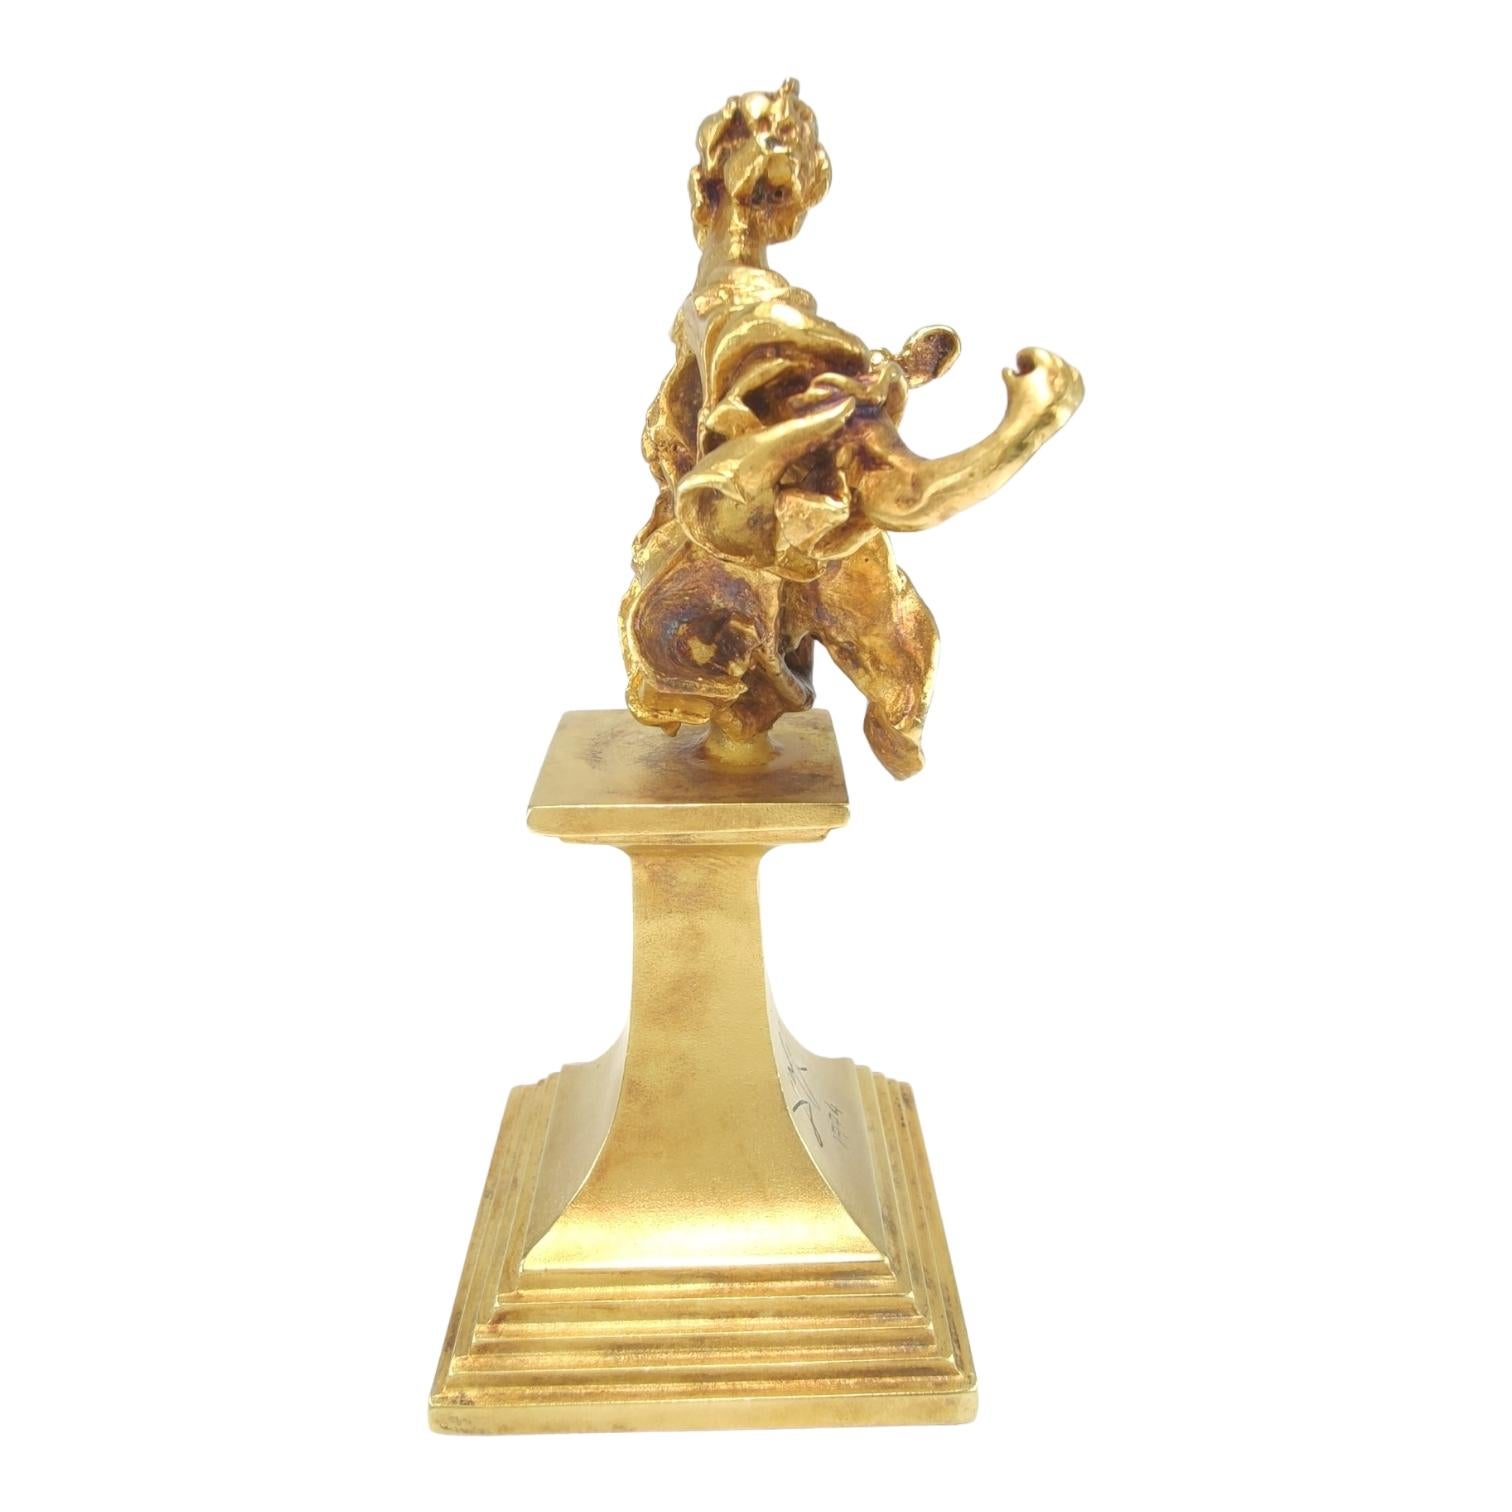  18K solid Gold Madonna of Port Lligat A Surreal Tribute by Salvador Dalí  In Excellent Condition For Sale In Sant Josep de sa Talaia, IB